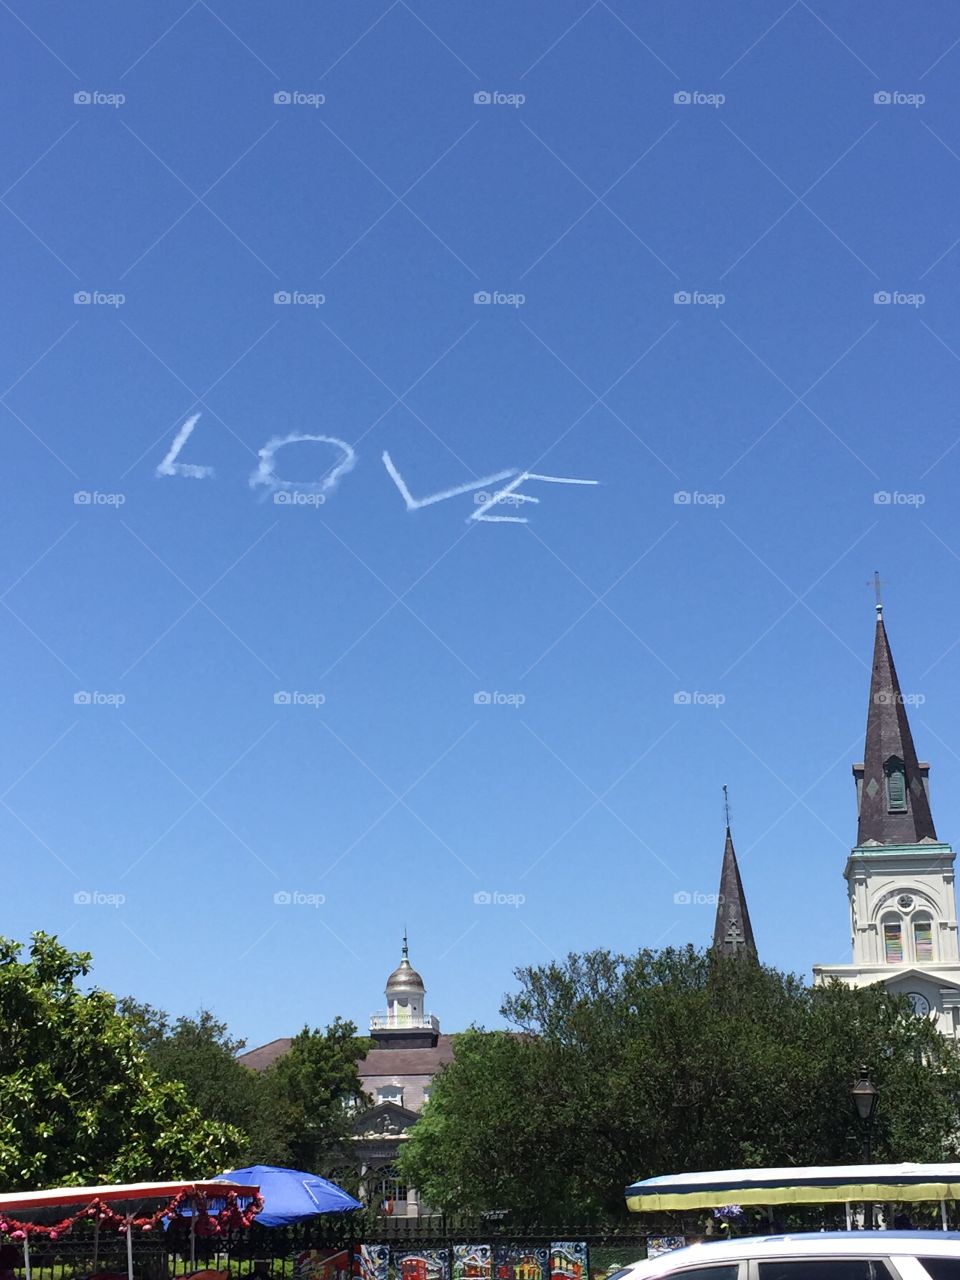 Message in the sky. Sky writing 